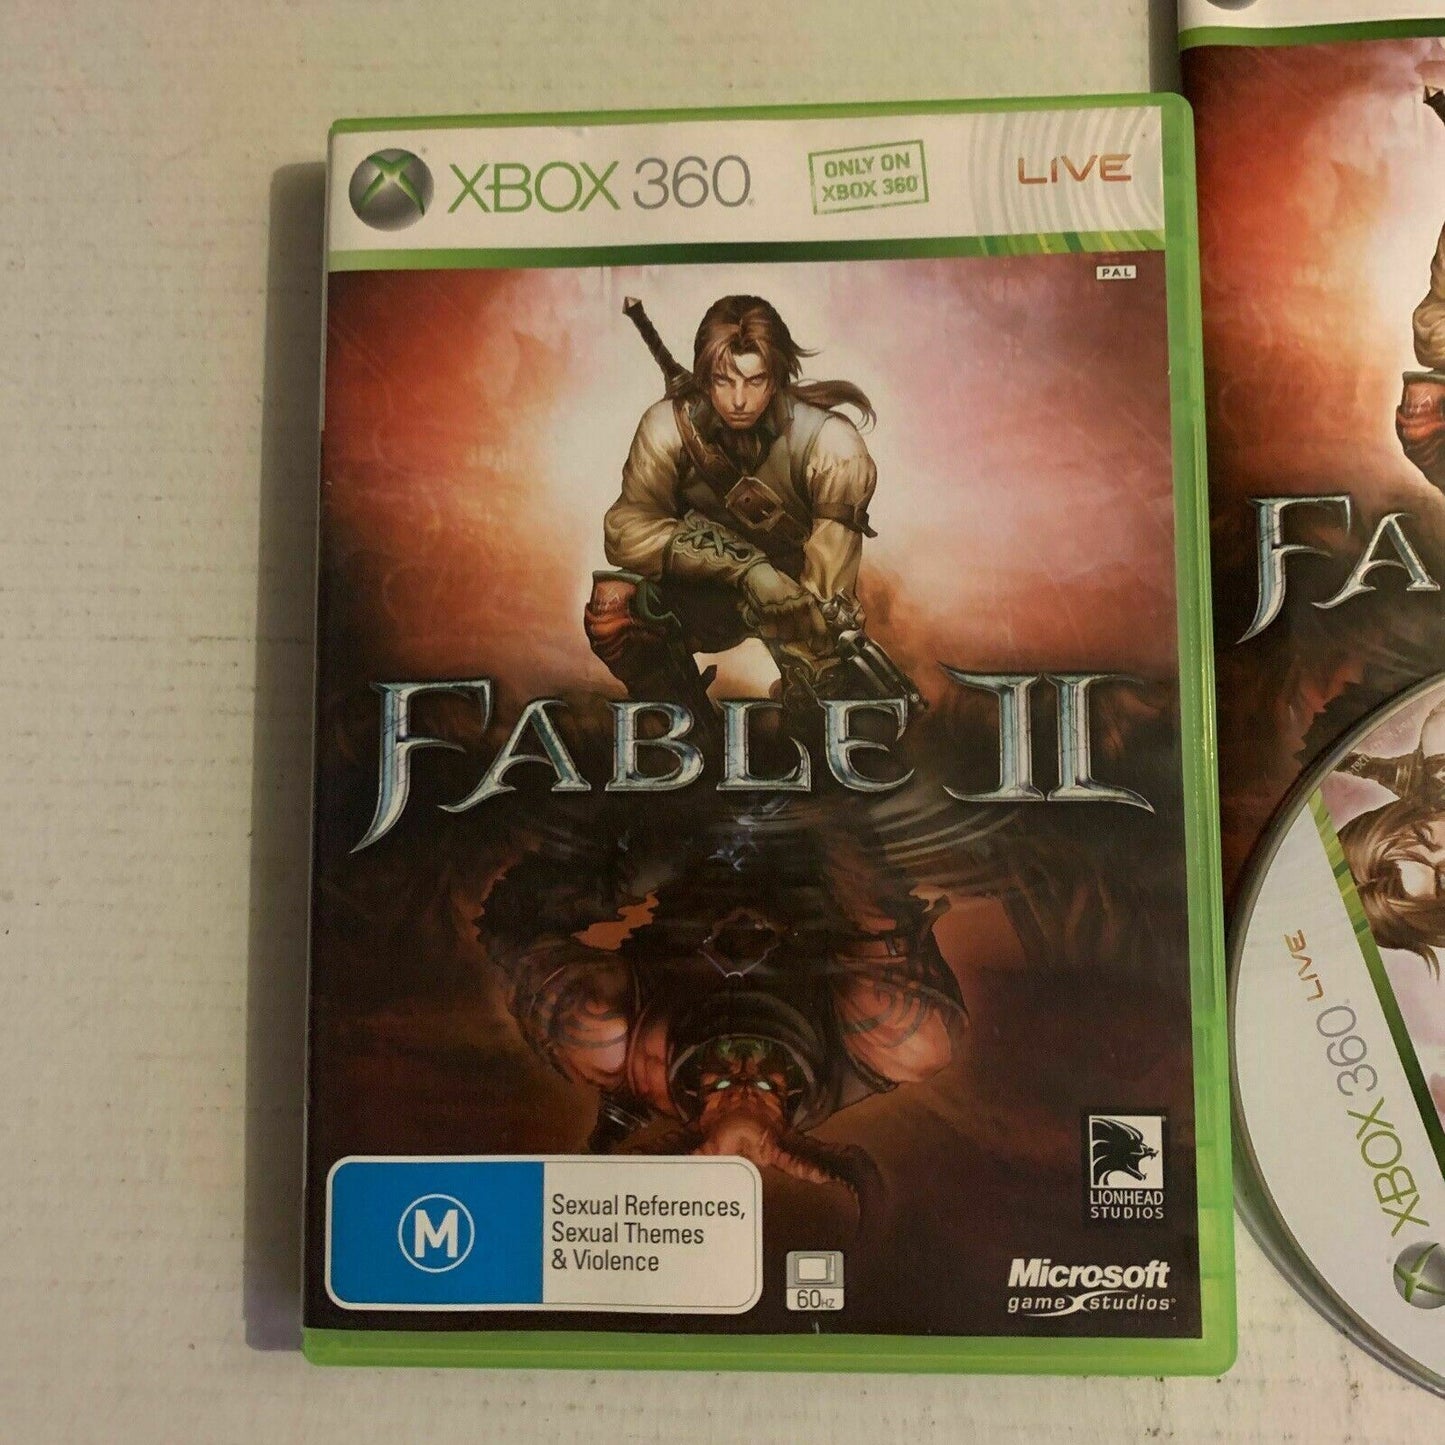 Fable II 2 - Microsoft Xbox 360 PAL Game Complete With Manual